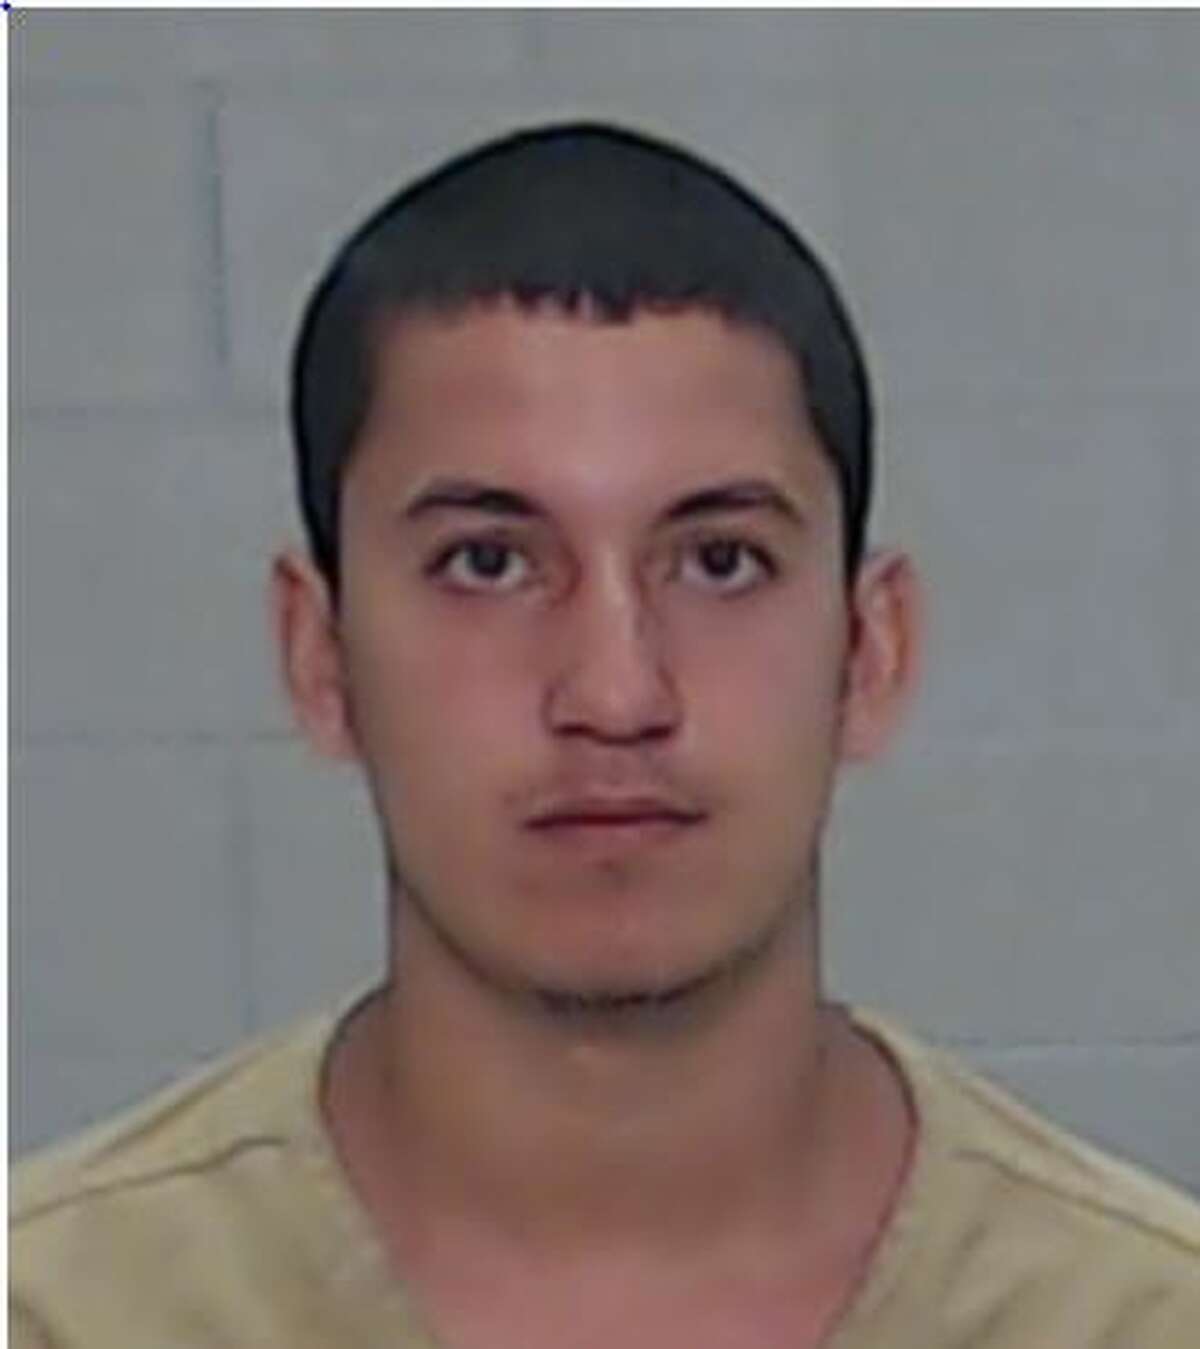 Josmasy Josel Cespedes, 17, was charged with aggravated sexual assault of a child, a first-degree felony, after reportedly admitting to raping his relative.